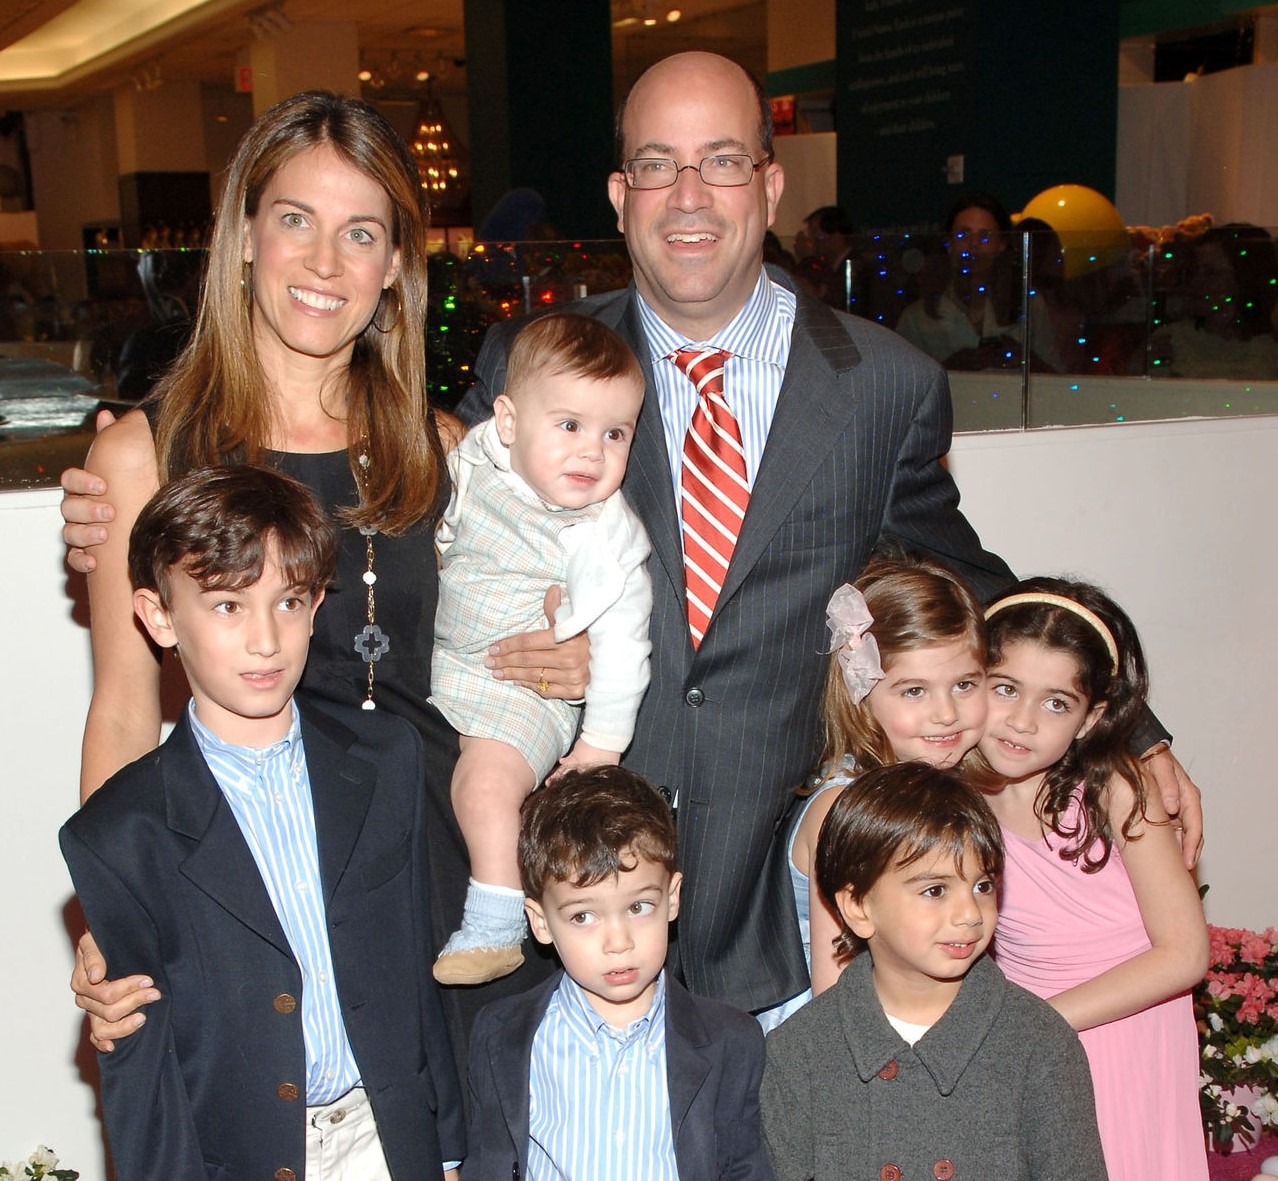 CNN Worldwide President, Jeff with his wife and four children, attending an event.